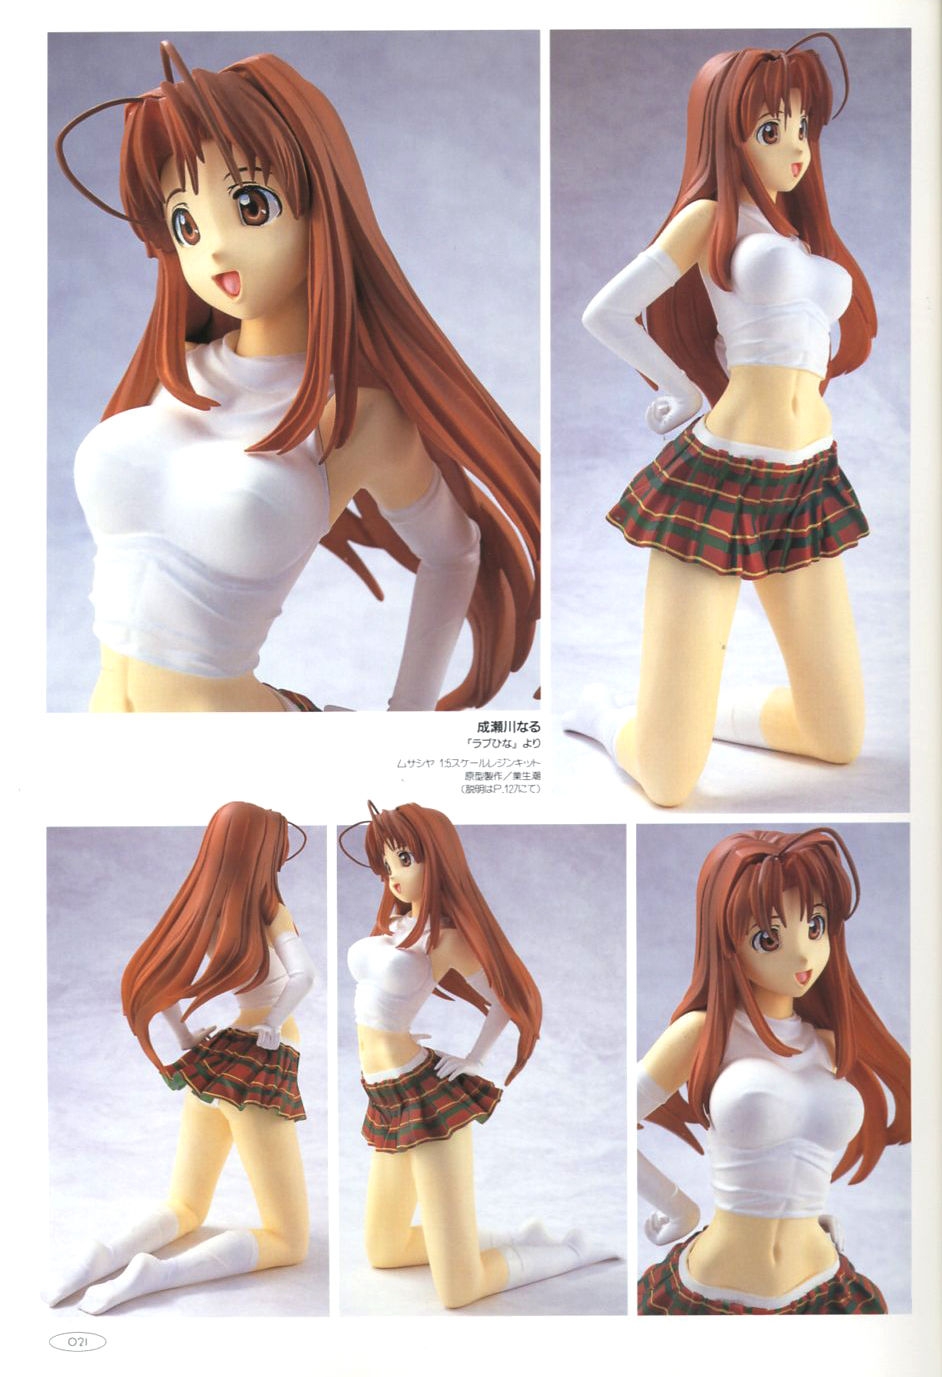 Hobby Japan Mook All That Figure 2001 15